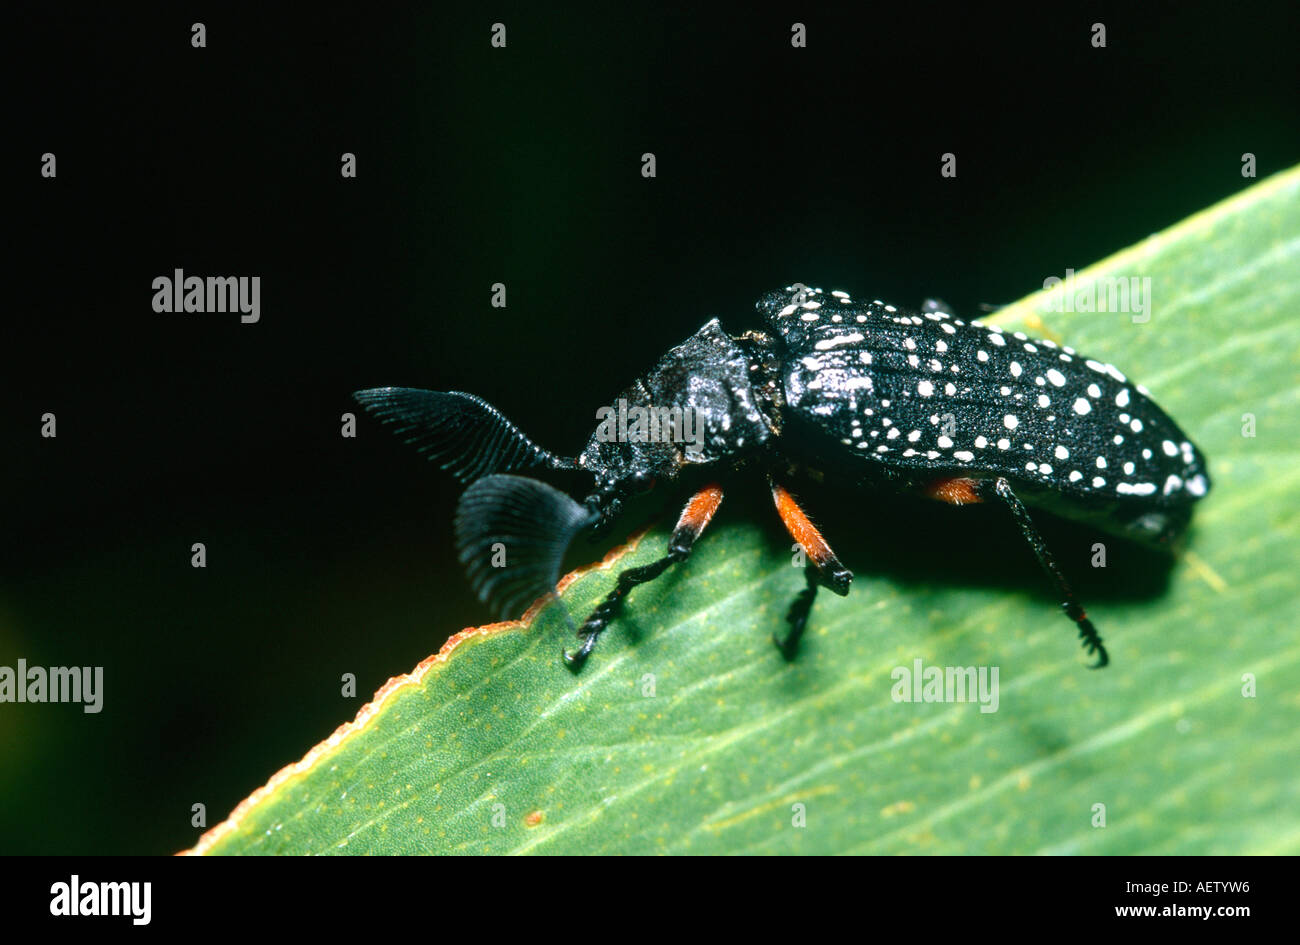 Beetle with feathery antennae Stock Photo